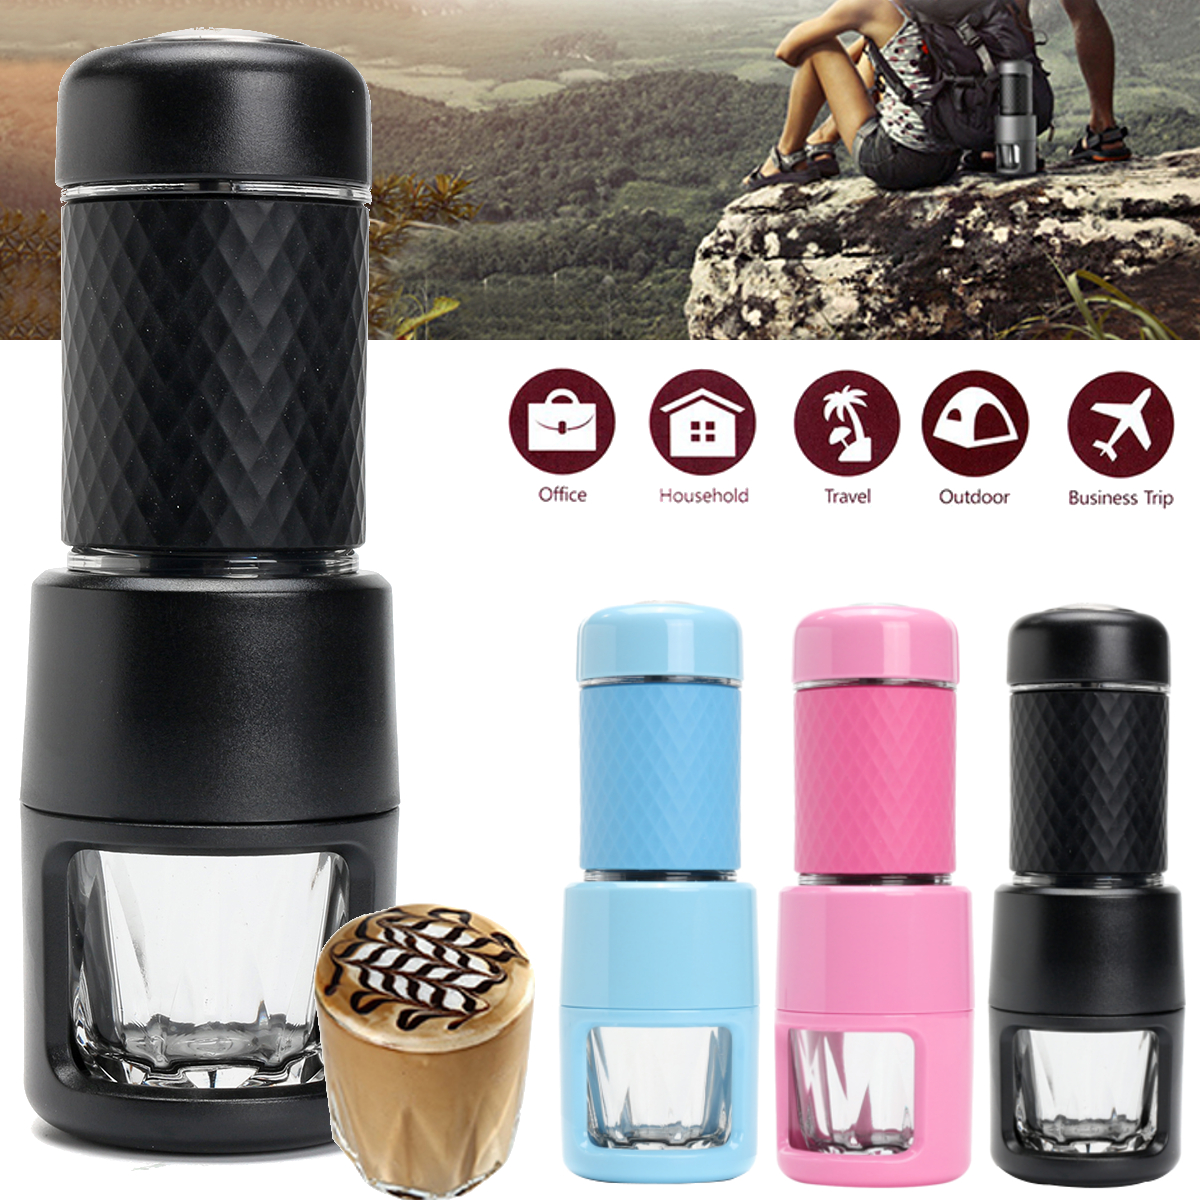 Portable Coffee Maker Travel Handheld Mini Manual Espresso Machine For Outdoor Camping Home Use 16